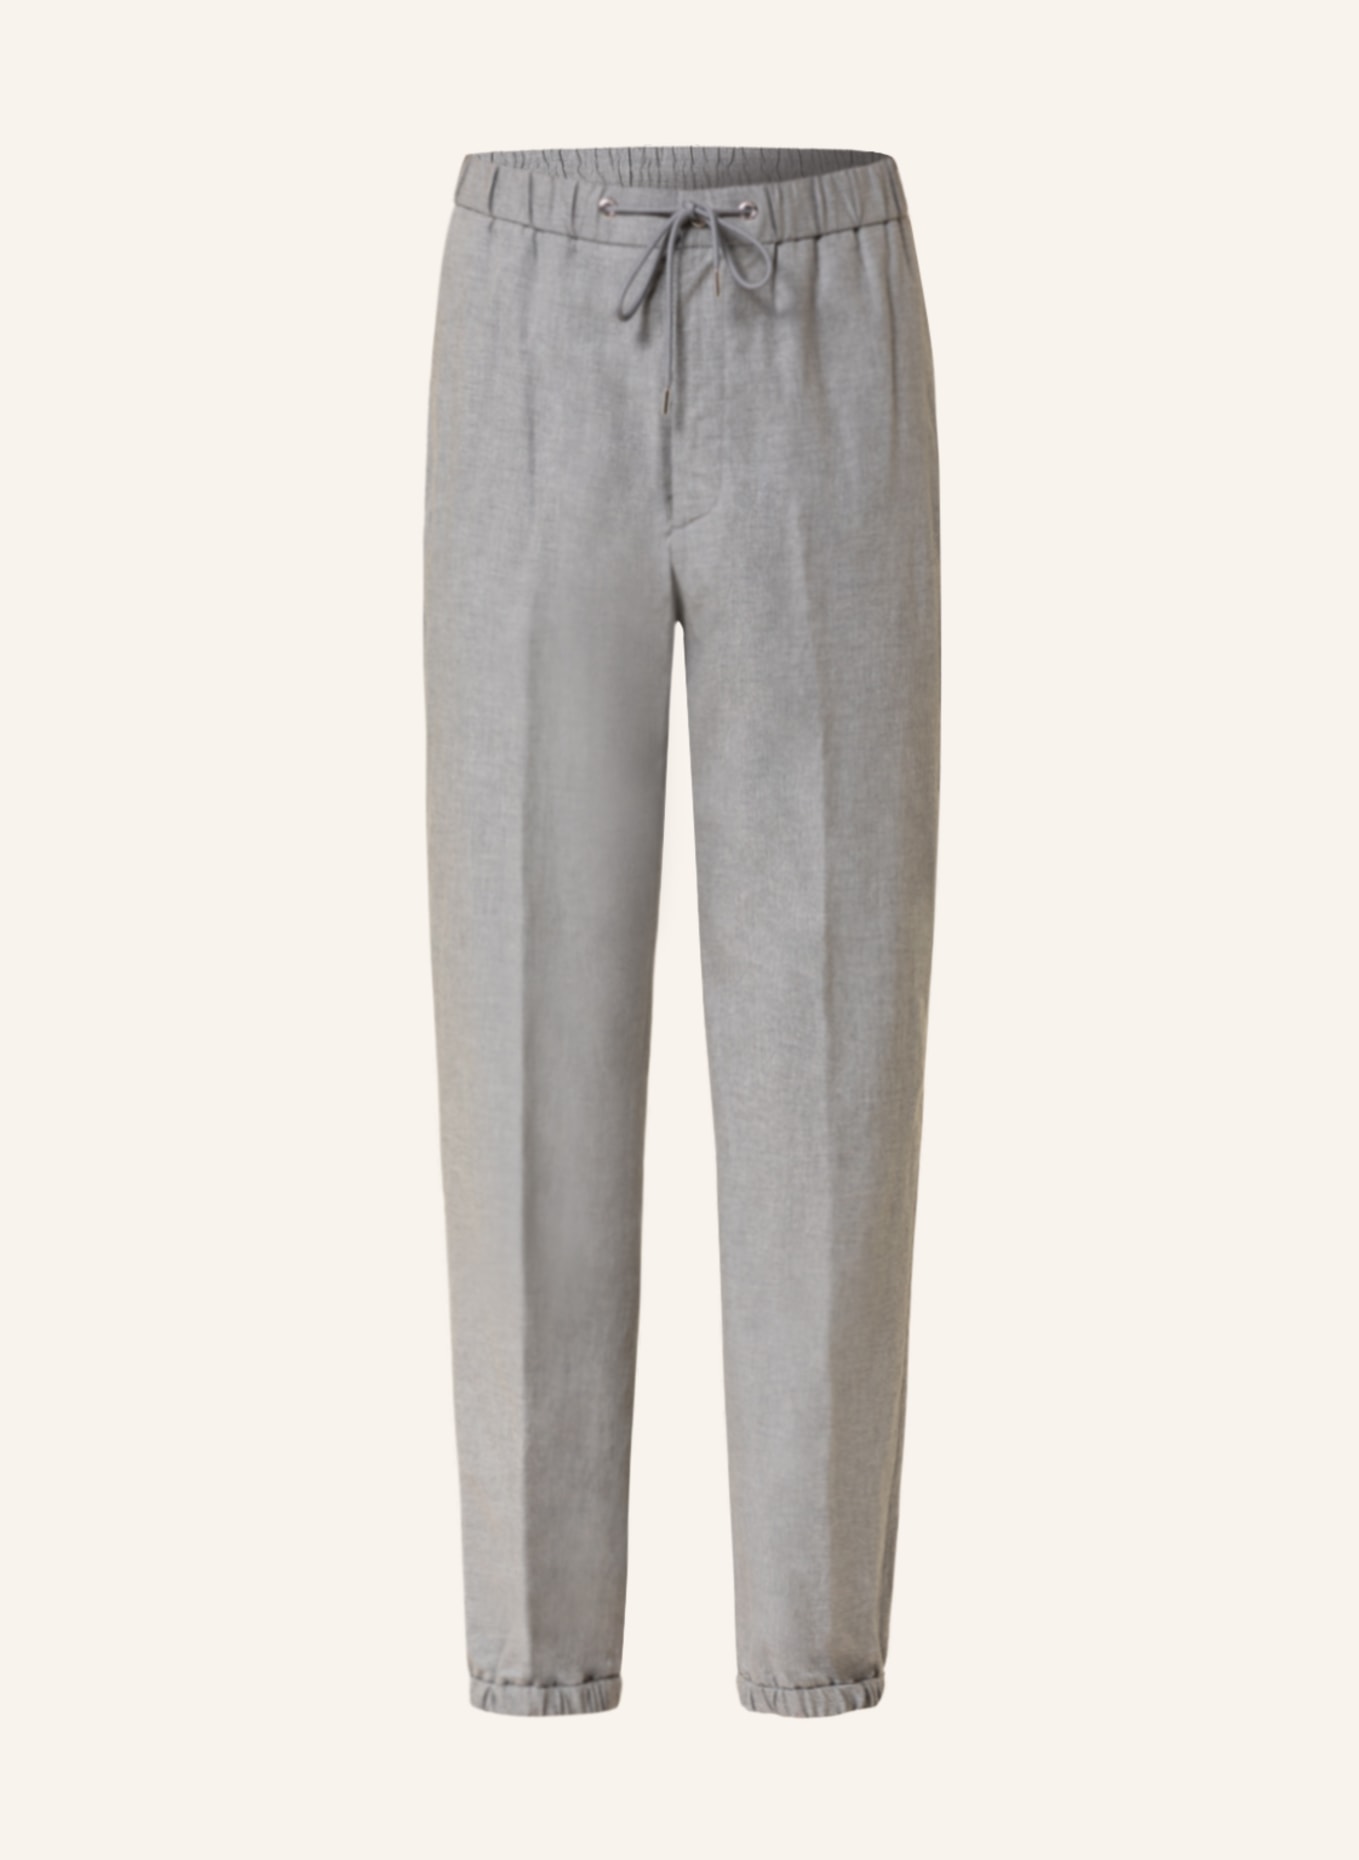 MONCLER Pants in jogger style, Color: GRAY (Image 1)